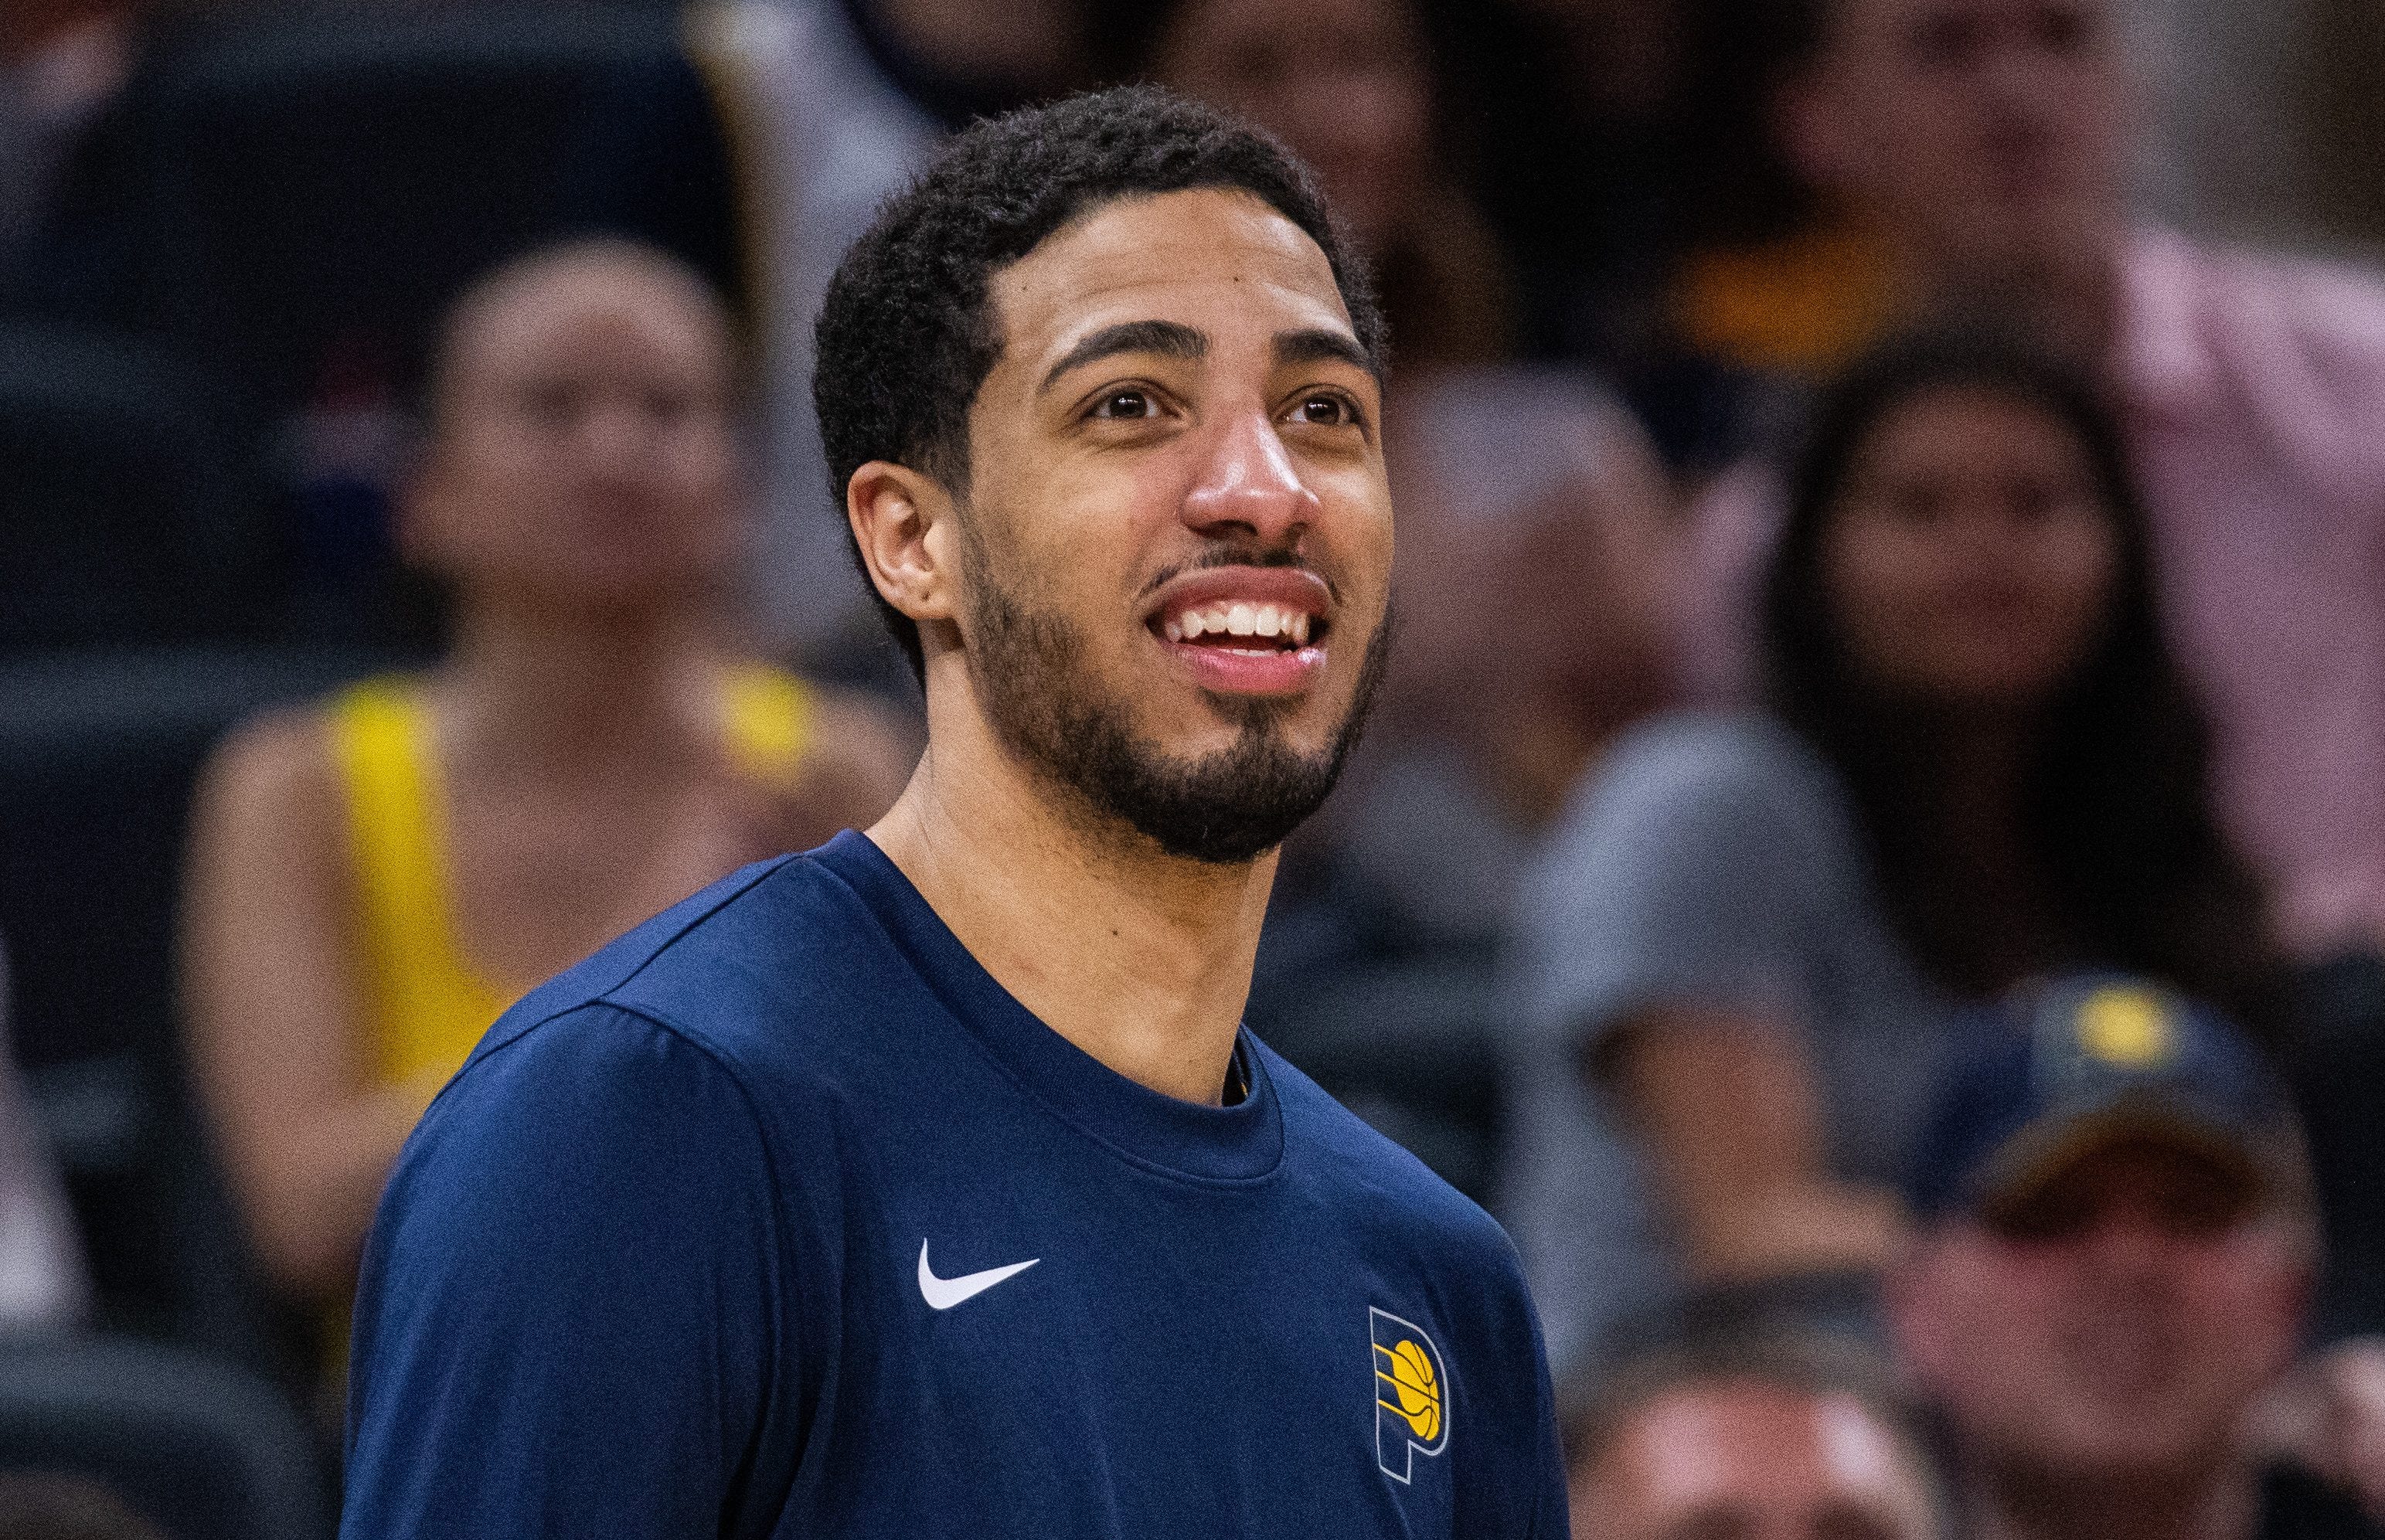 tyrese haliburton took a brutal shot at the bucks’ playoff crowd after the pacers tied the series